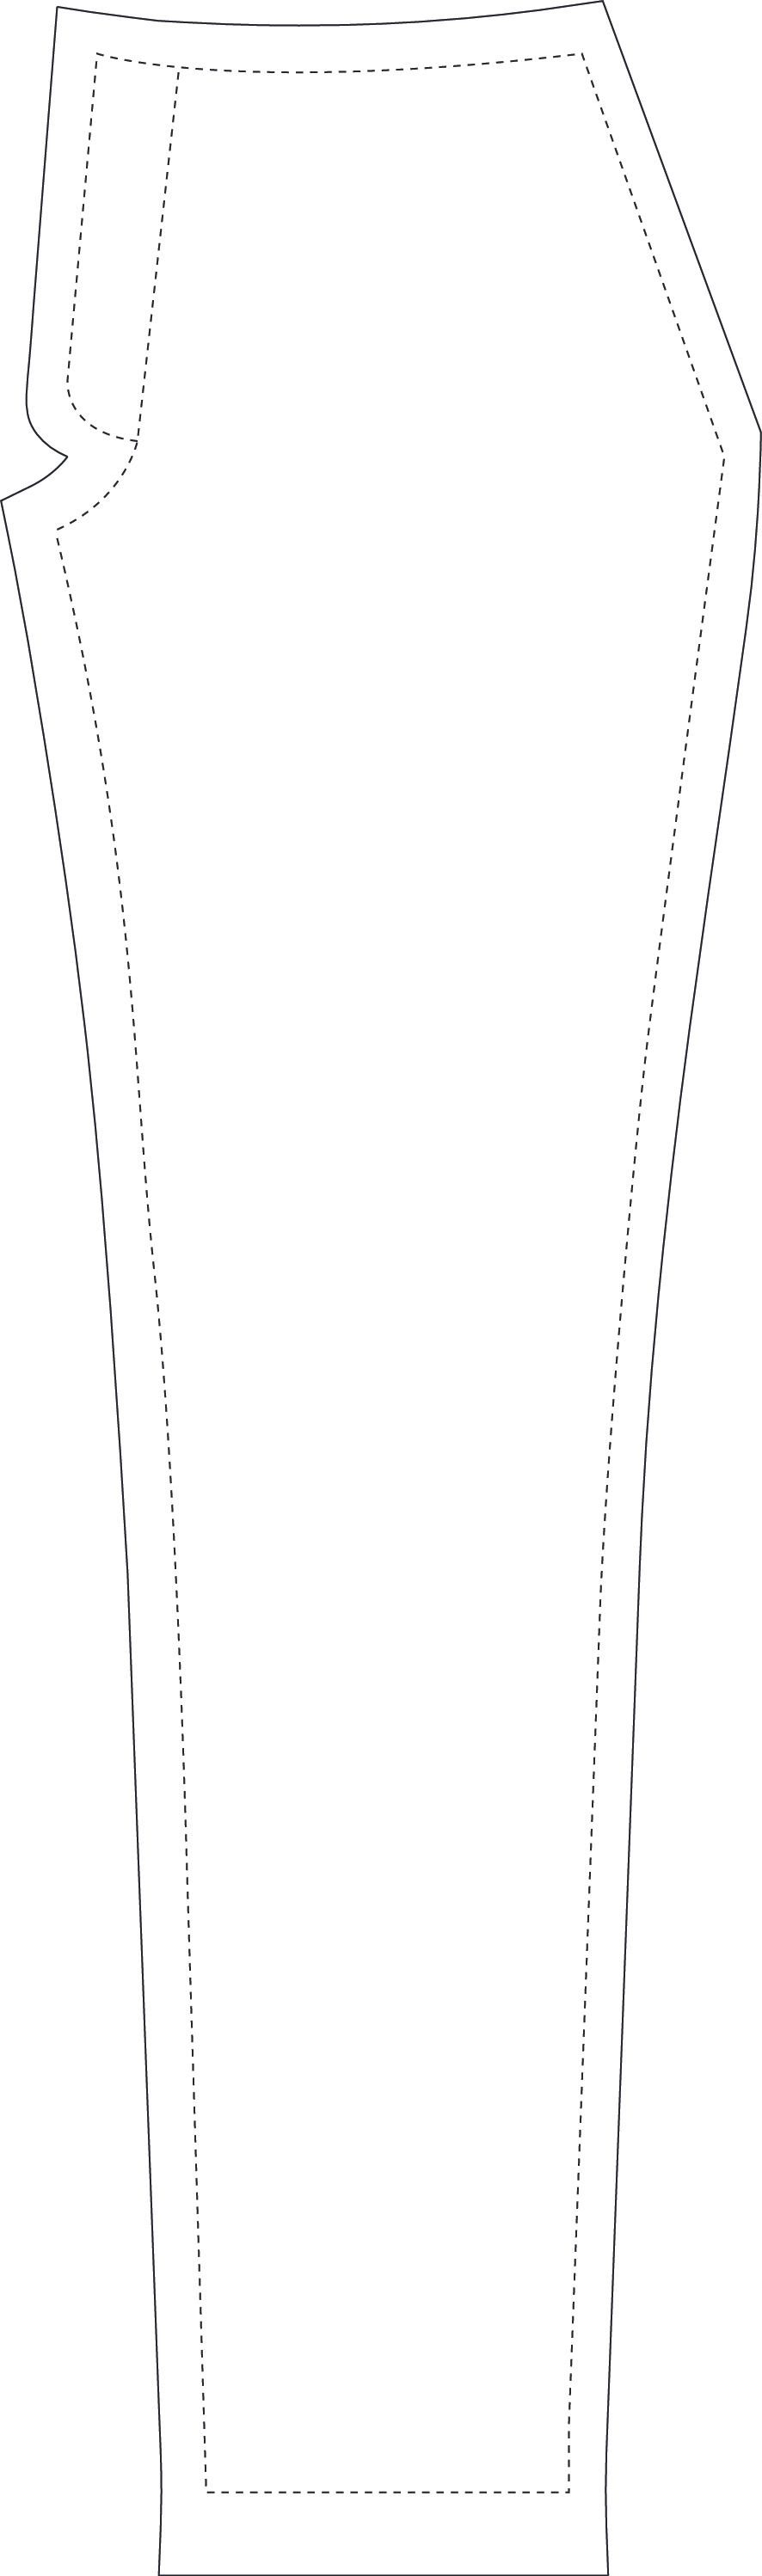 Pants pattern fitting help needed! : r/sewing